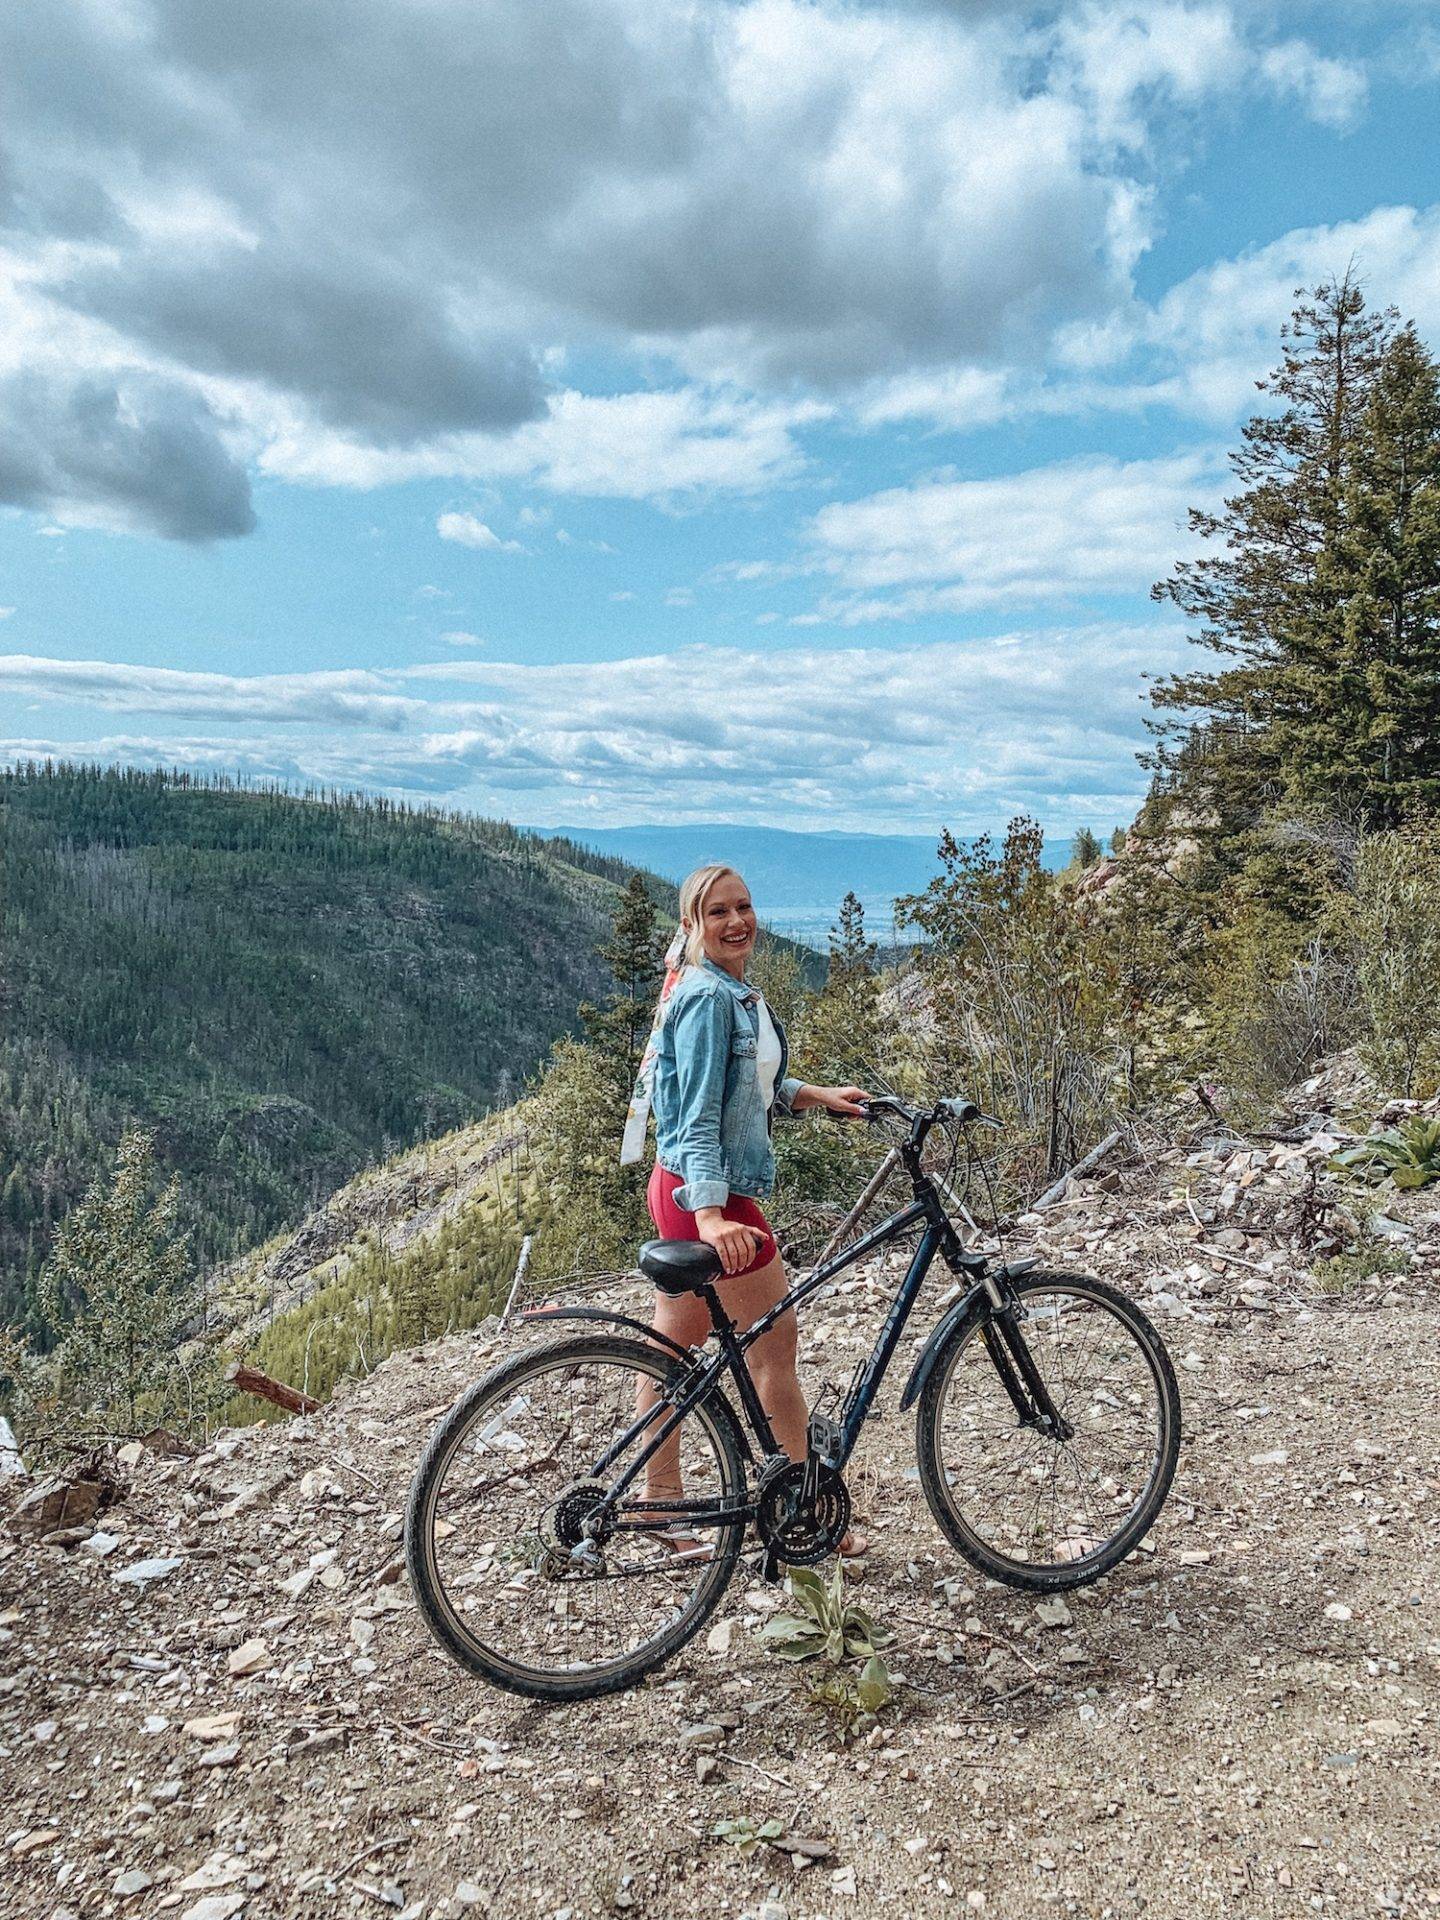 Planning a trip to Kelowna soon? This guide covers all the best things to do in Kelowna from a locals perspective! From wineries and cideries, to adventure activities, hikes, waters sports and more. This guide has everything you need to plan your visit to beautiful Kelowna! Pictured here: Kettle Valley Trail